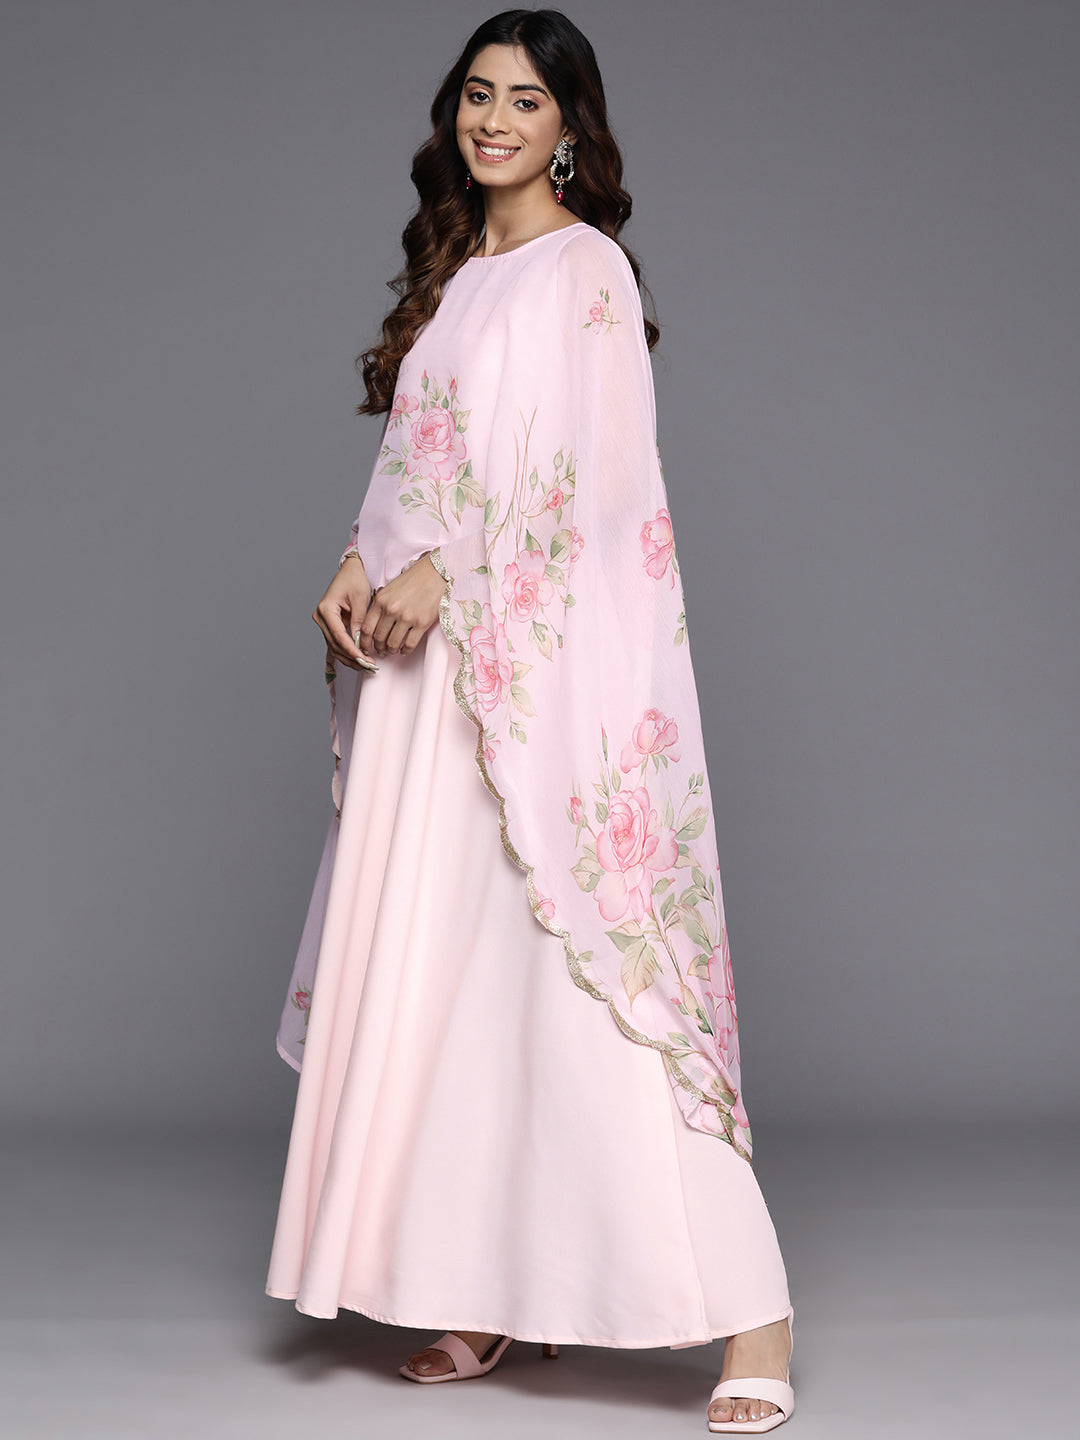 Floral Printed Layered Crepe Maxi Gown Dress